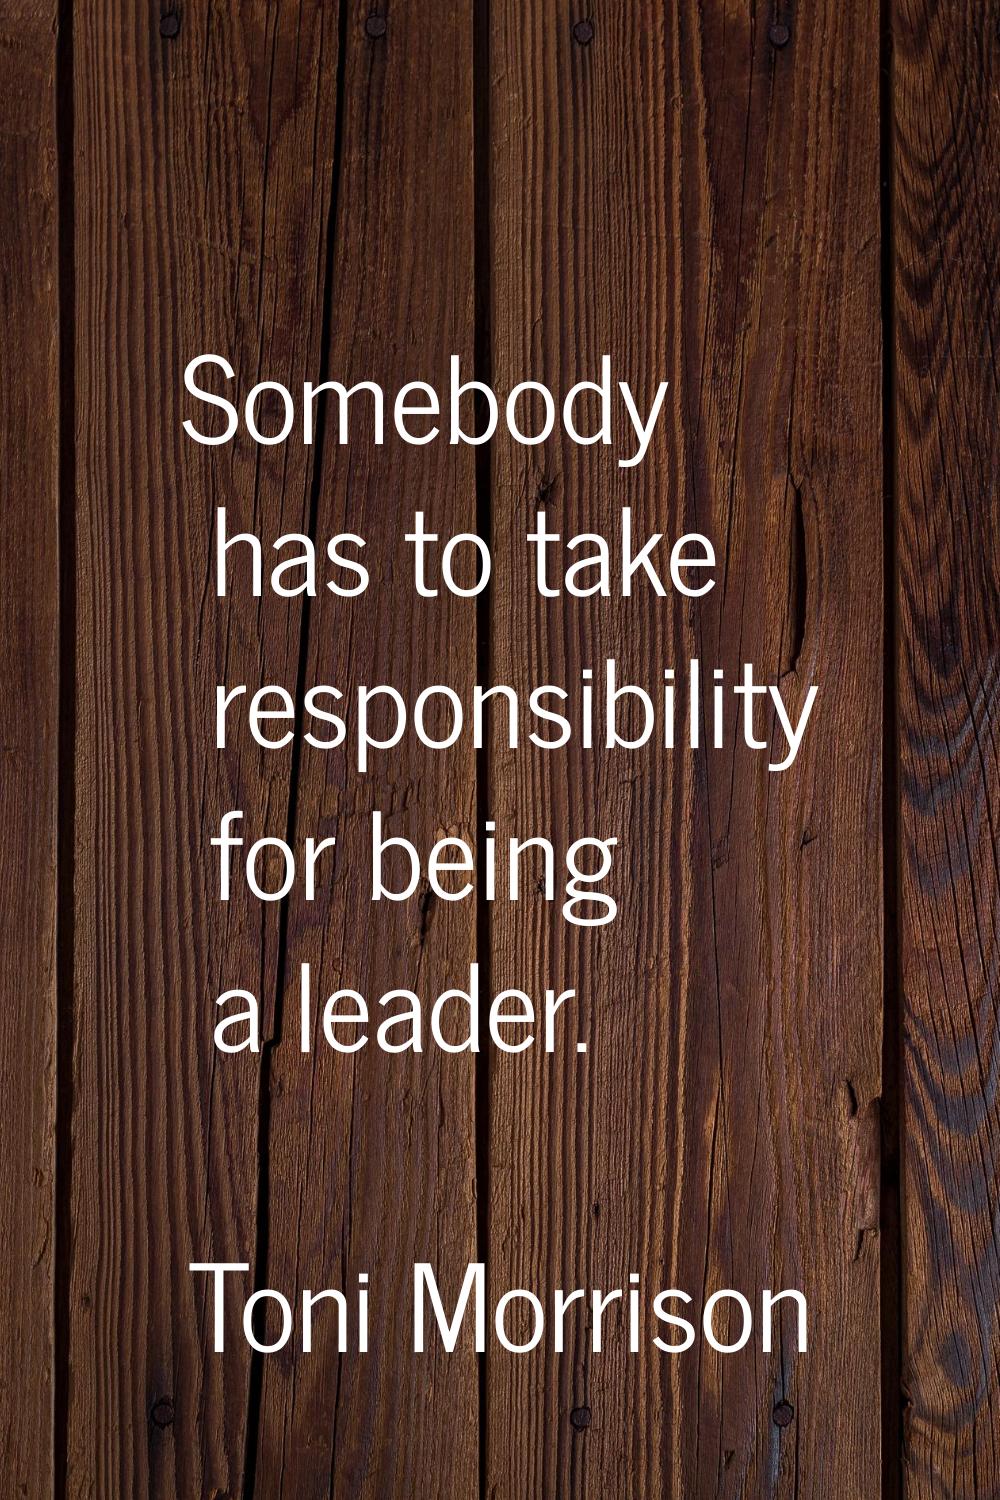 Somebody has to take responsibility for being a leader.